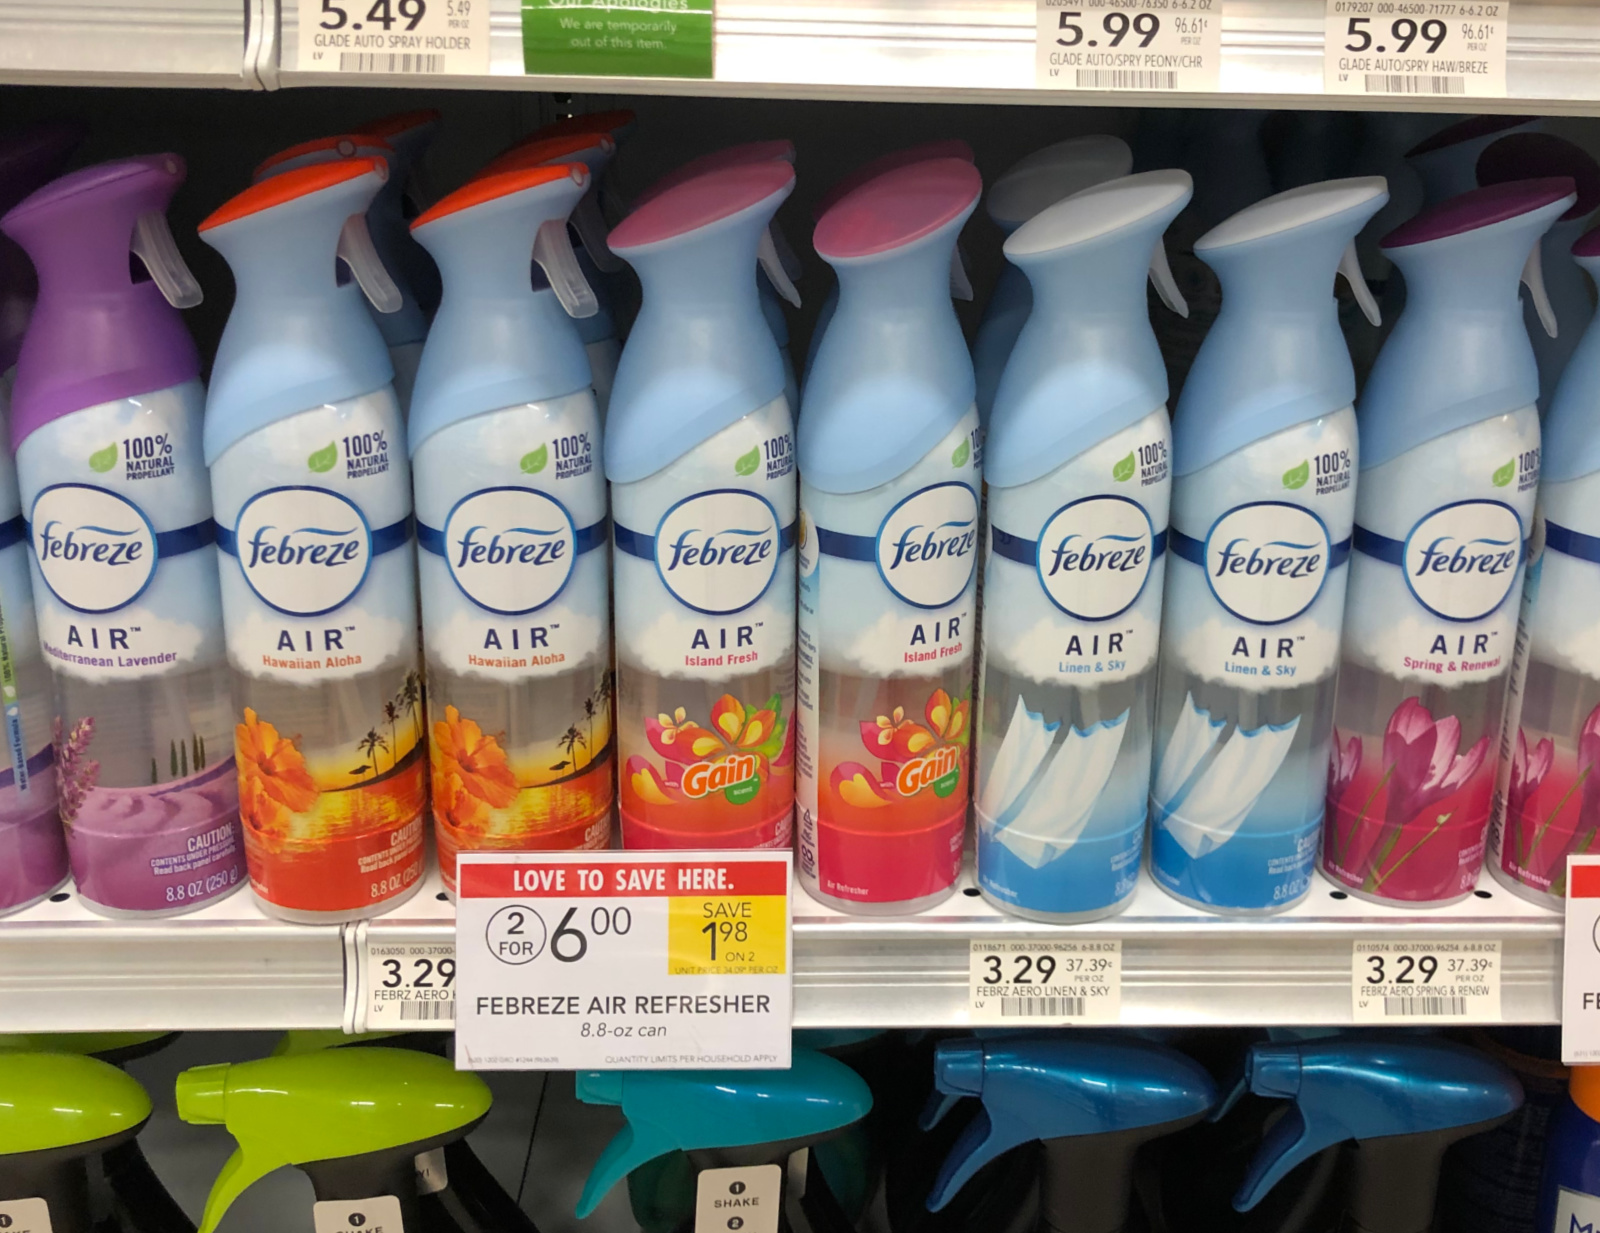 Febreze Air Effects As Low As $1.50 At Publix on I Heart Publix